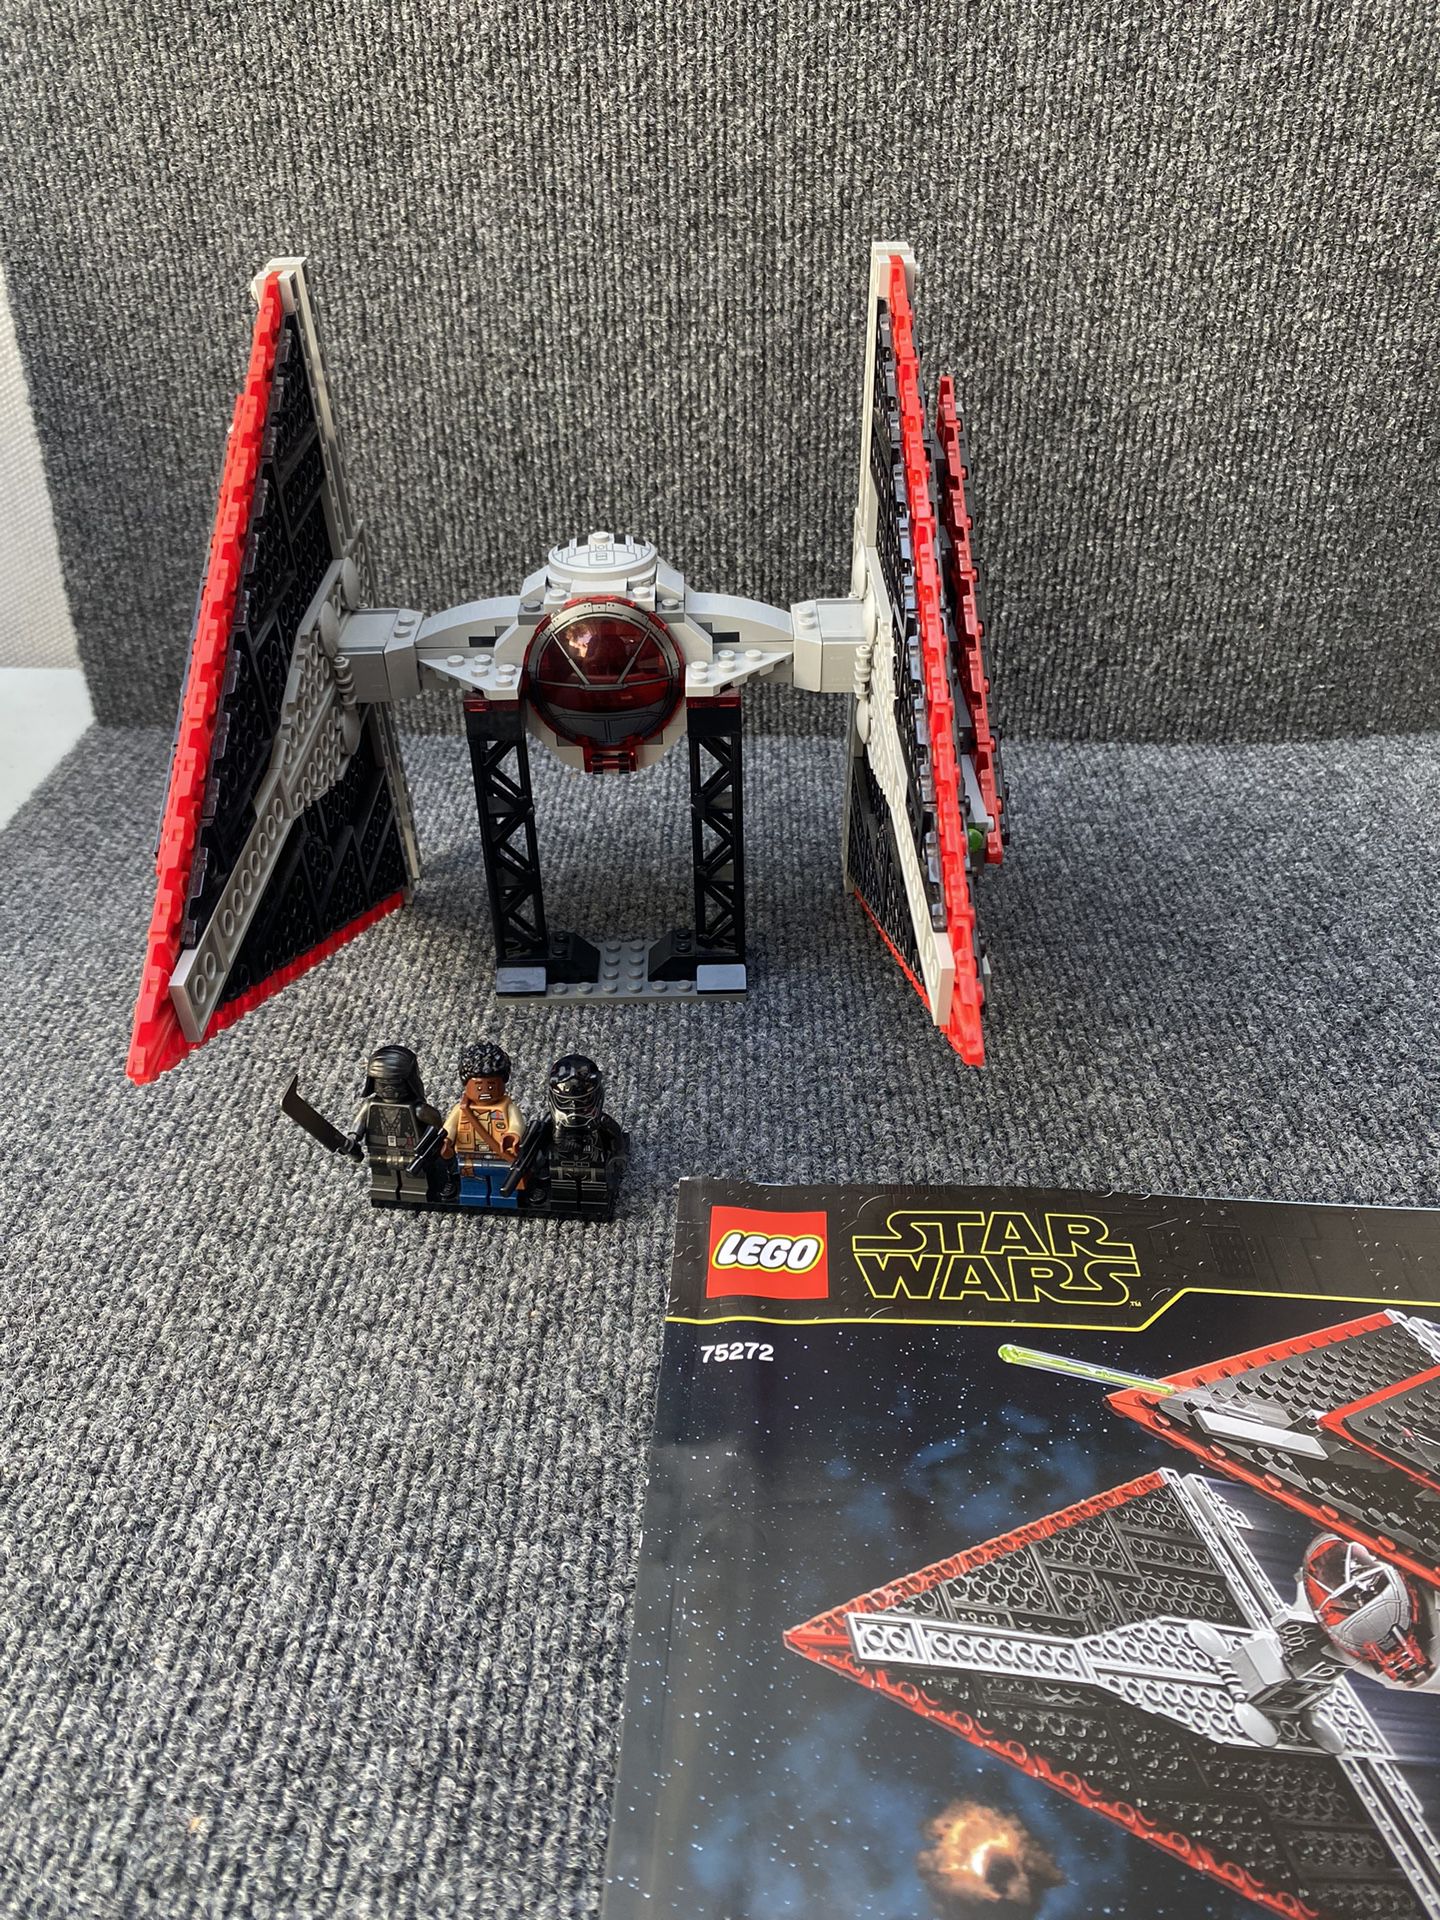 Lego Star Wars 75272 Sith Tie Fighter for Sale in Los Angeles, CA - OfferUp